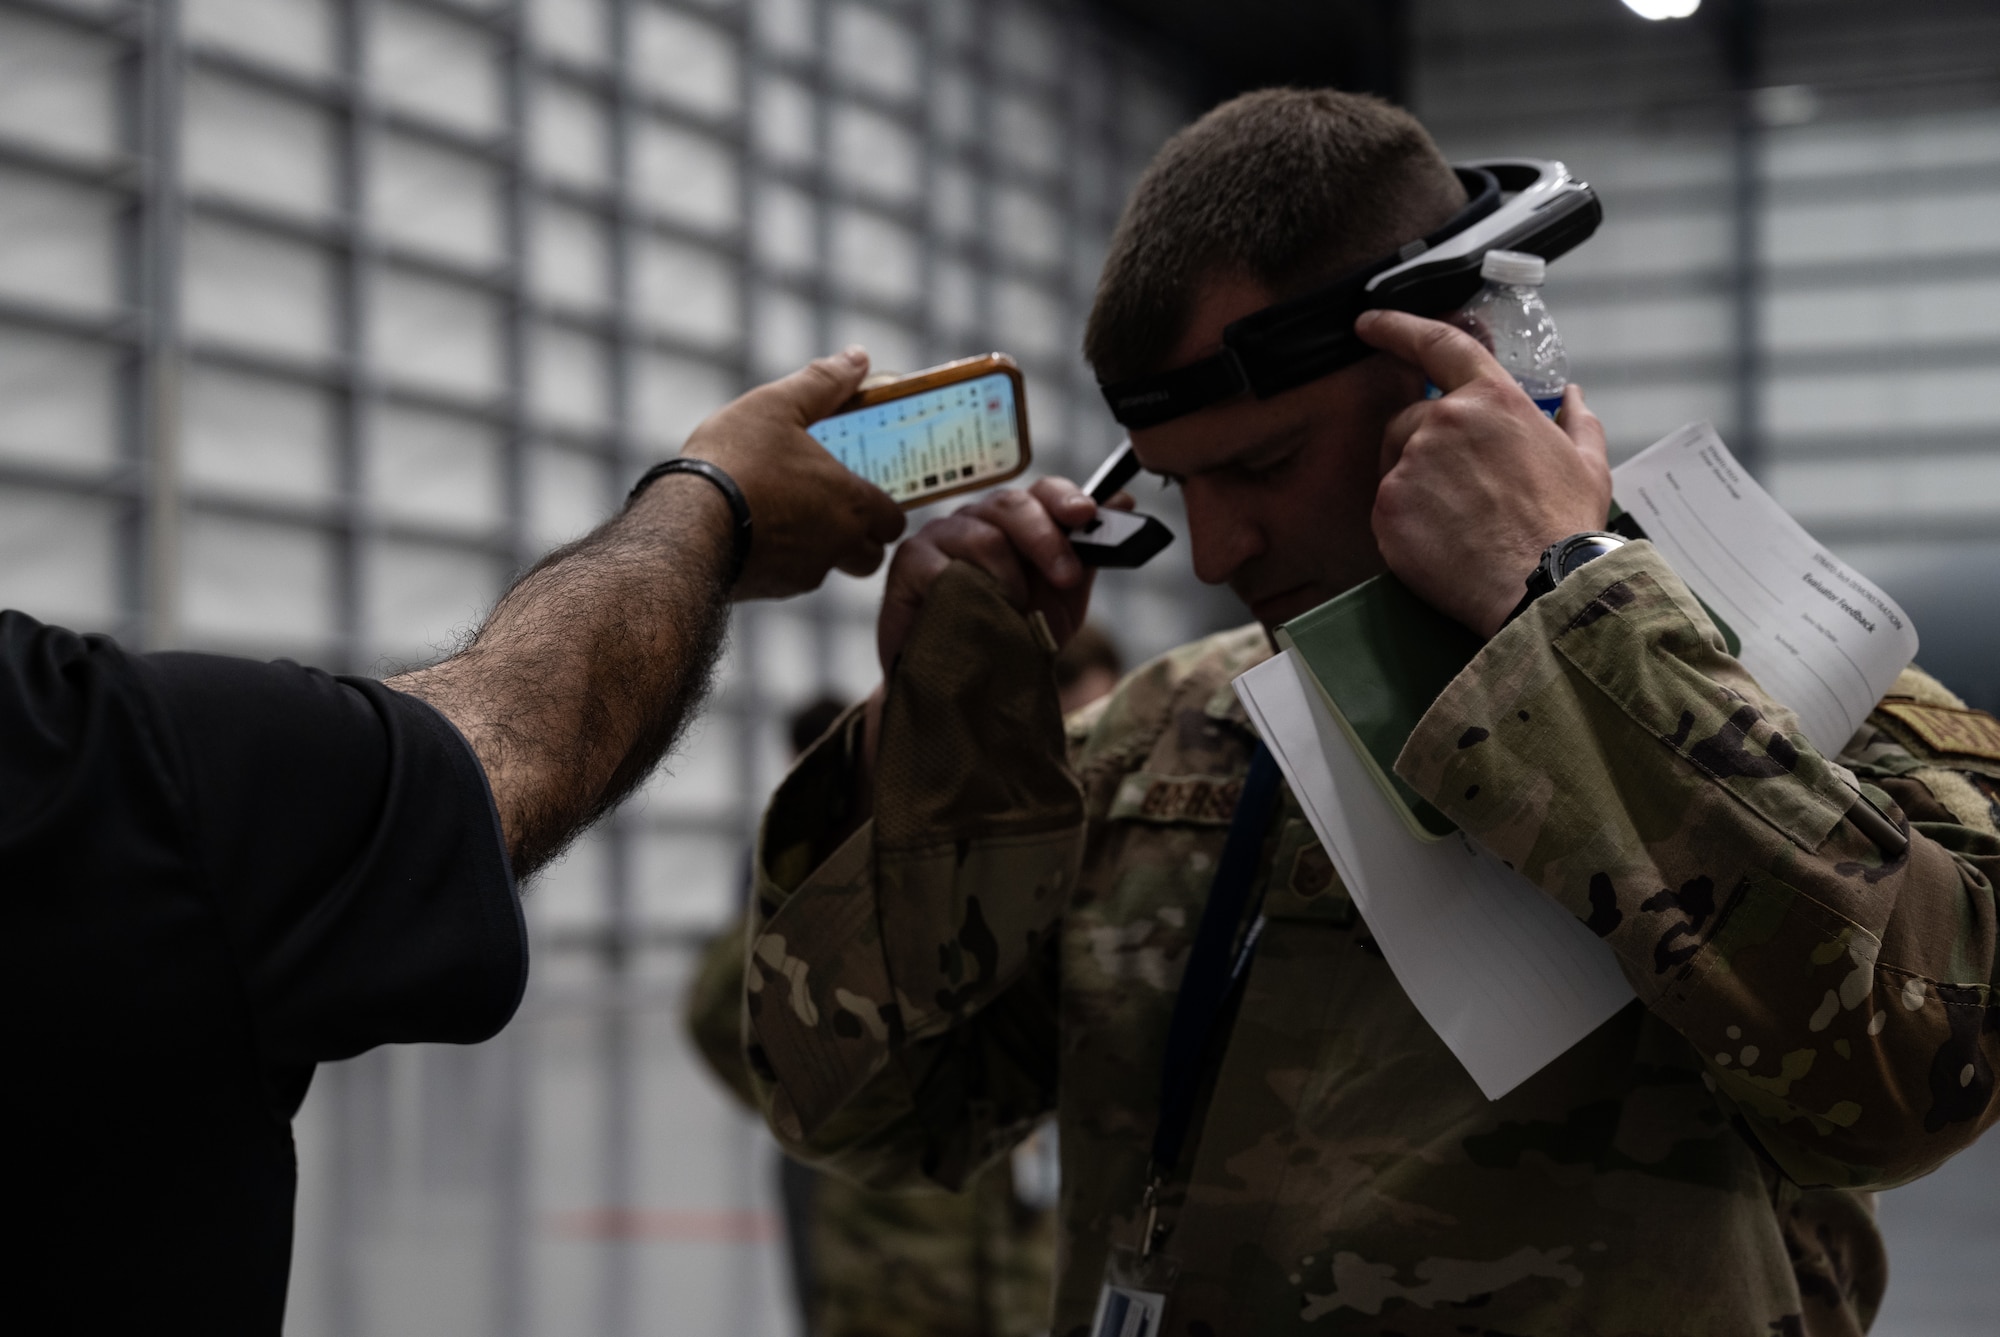 Master Sgt. James Goerss, 76th Aircraft Maintenance Group aircraft structural section chief, tests the voice-activation for a headset during STRATO-Tech, a convention for the sustainment of the KC-135 Stratotanker, April 23, 2024, in Wichita, Kansas. STRATO-Tech is an initiative under the Sustainment Technologies, Research and Automation for Transformative Operations Testbed that studies, develops and tests innovations to improve the efficiency and cost-effectiveness of the KC-135. (U.S. Air Force photo by Staff Sgt. Tryphena Mayhugh)